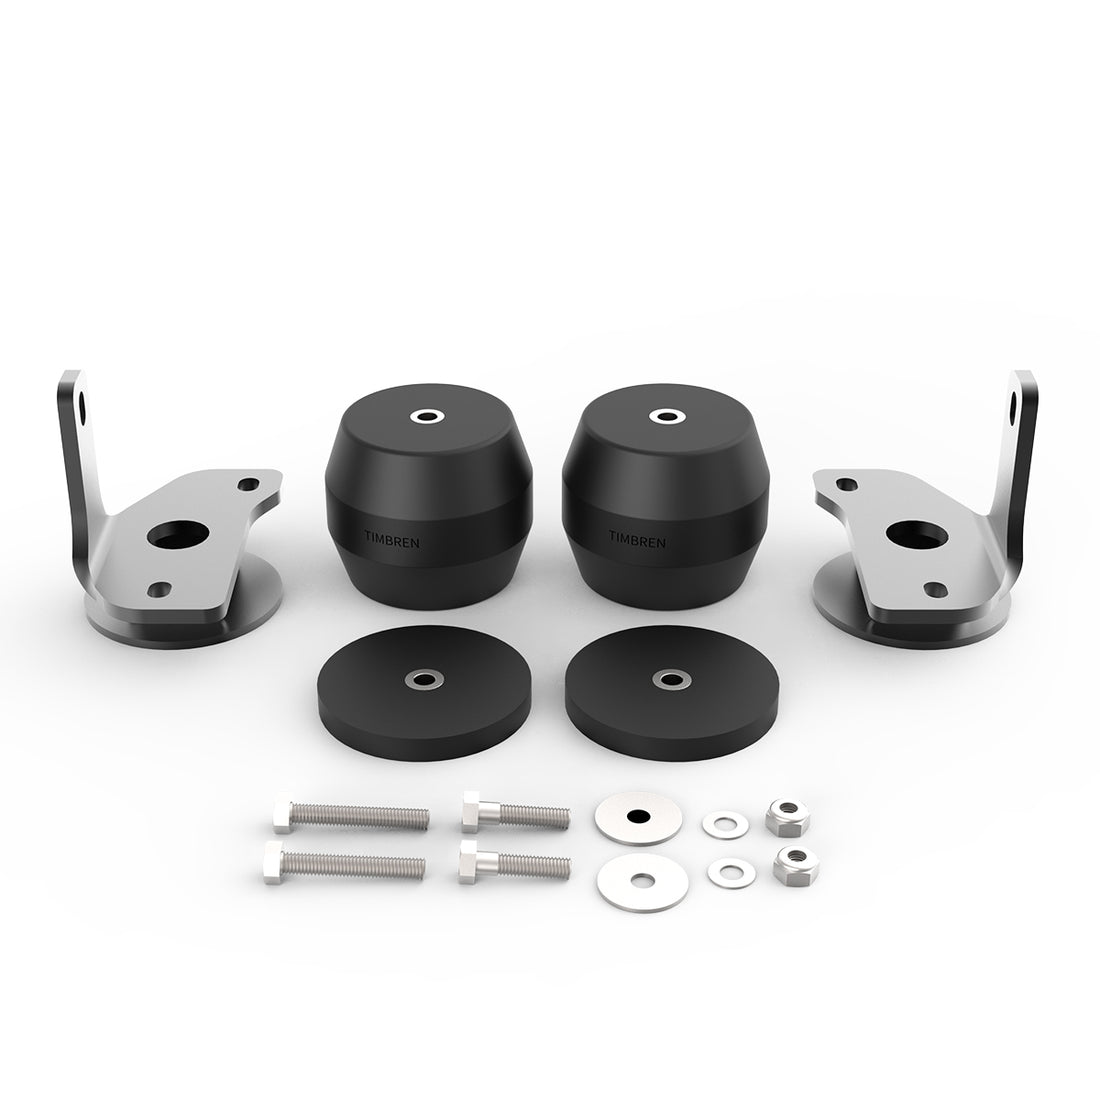 '22-24 Toyota Tundra & '24 Toyota Tacoma Timbren SES Suspension Enhancement System - Truck Camper Kit